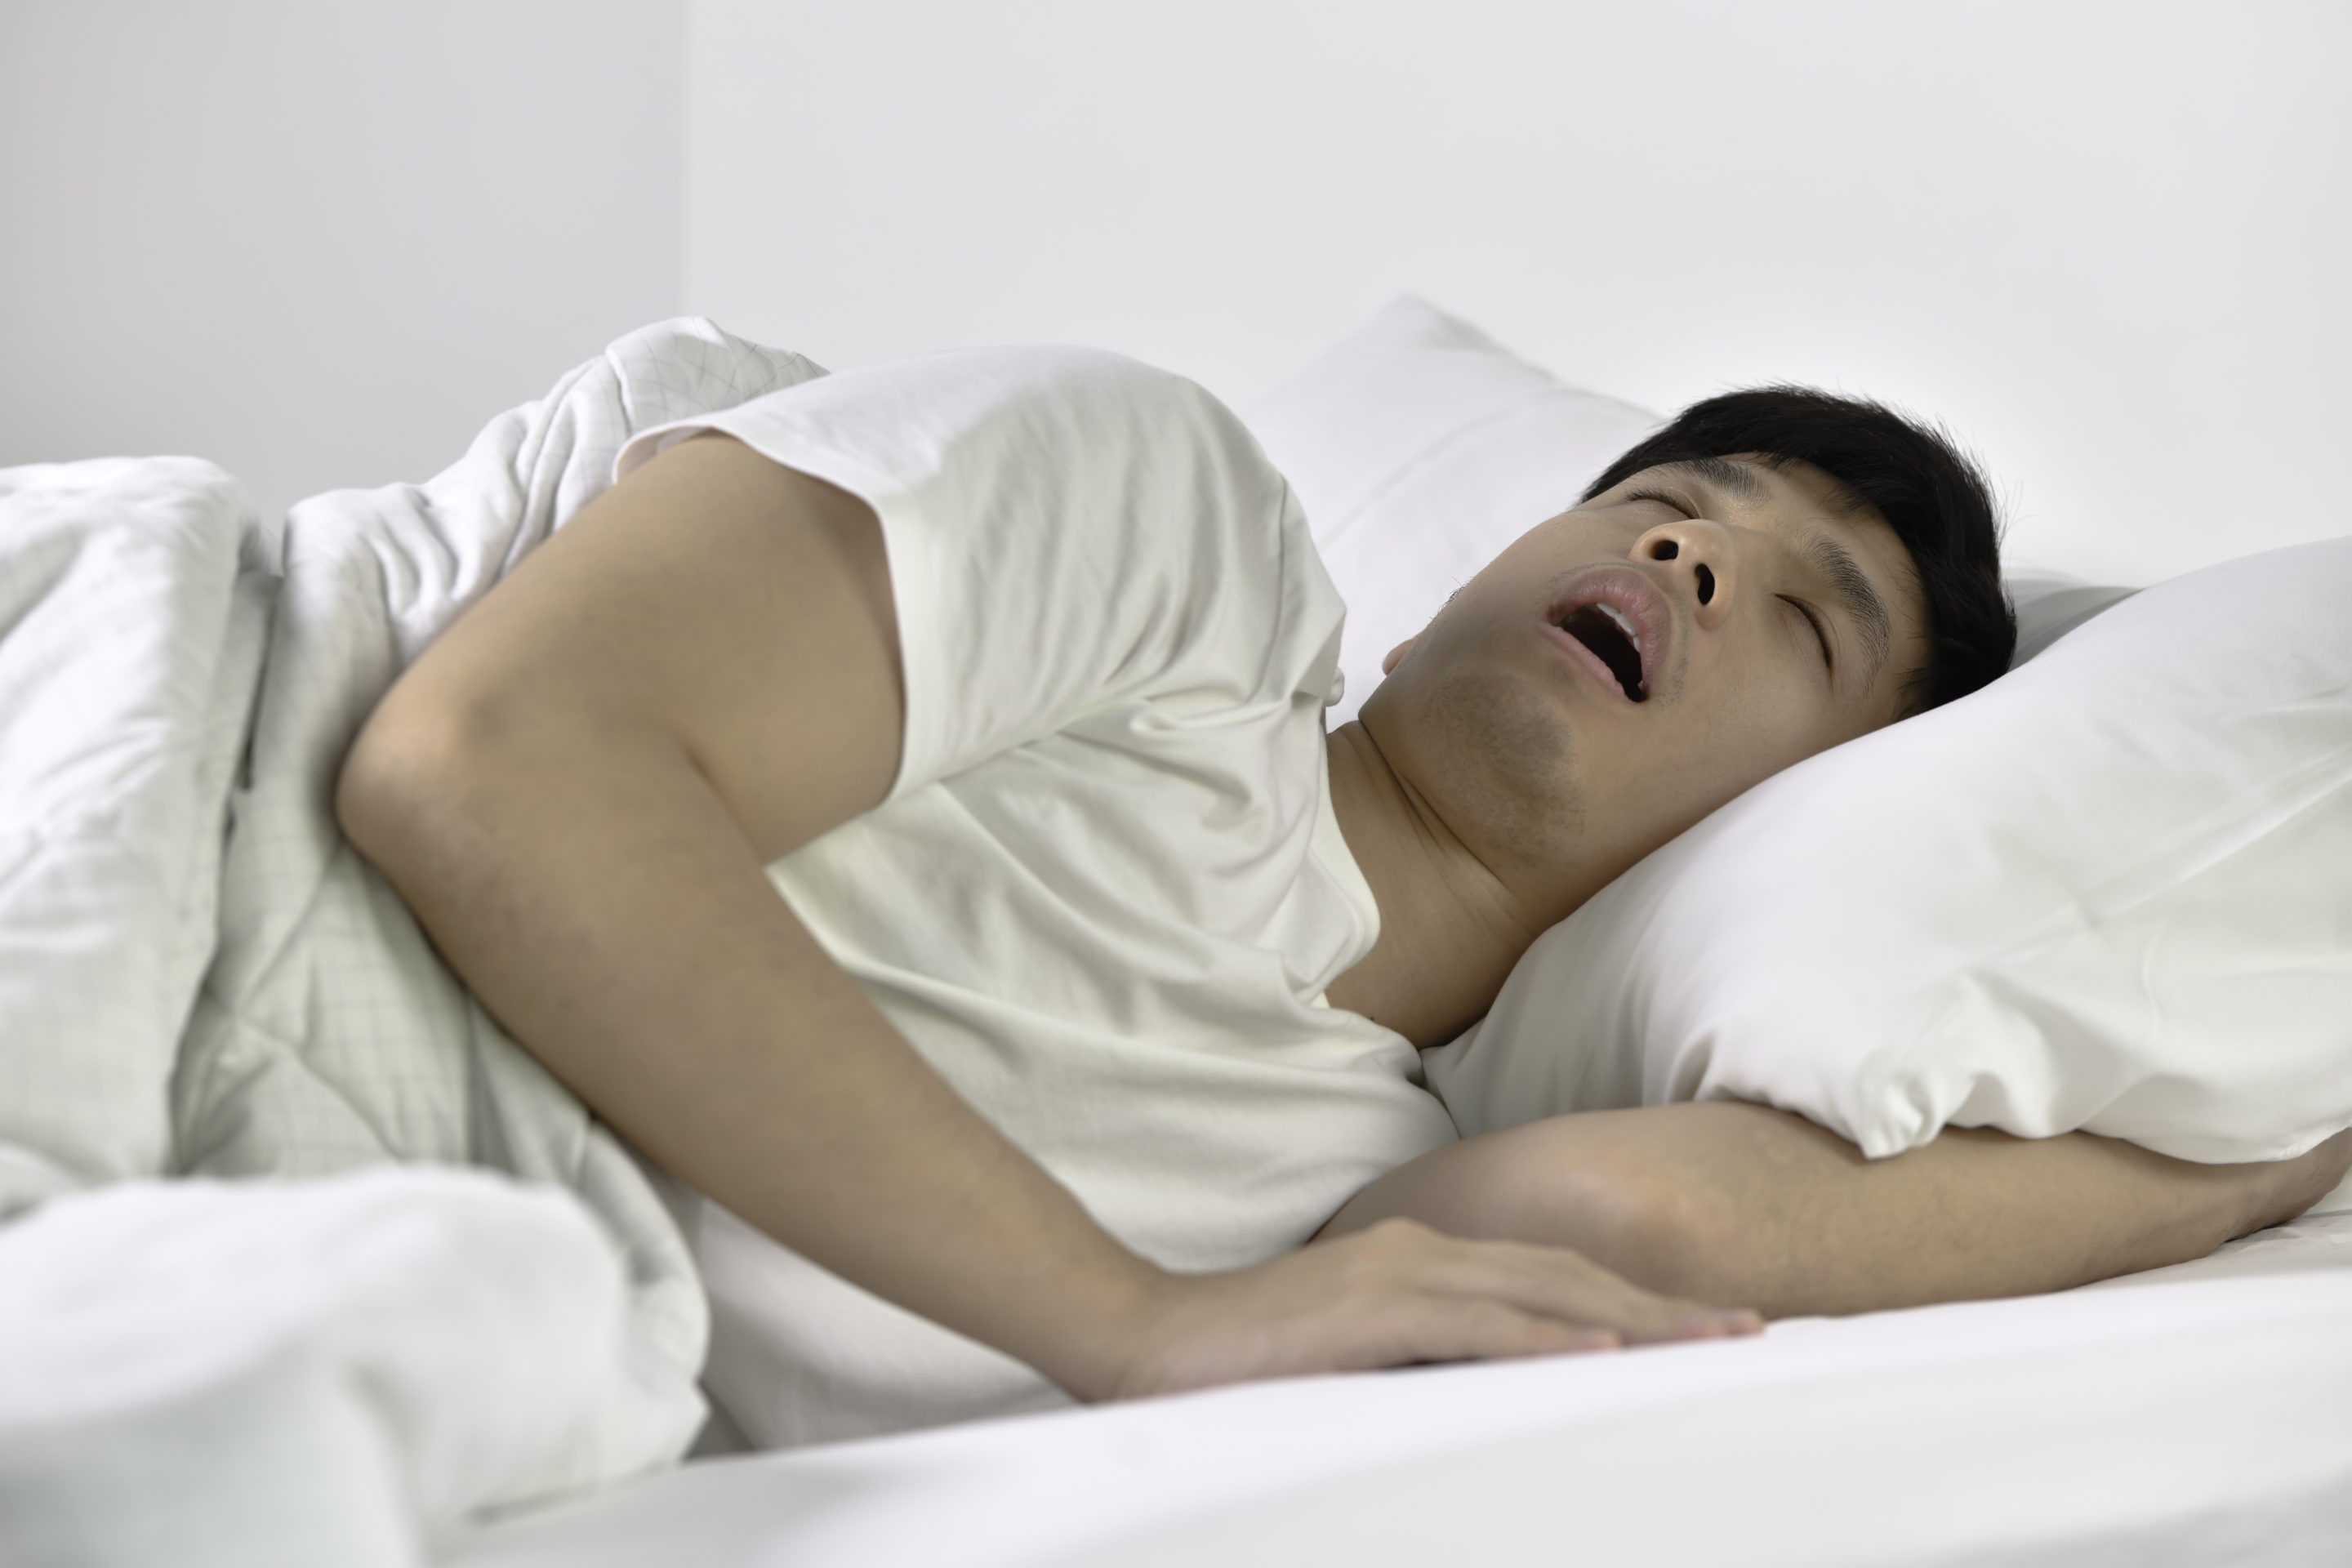 Young man snoring loudly while asleep in bed.